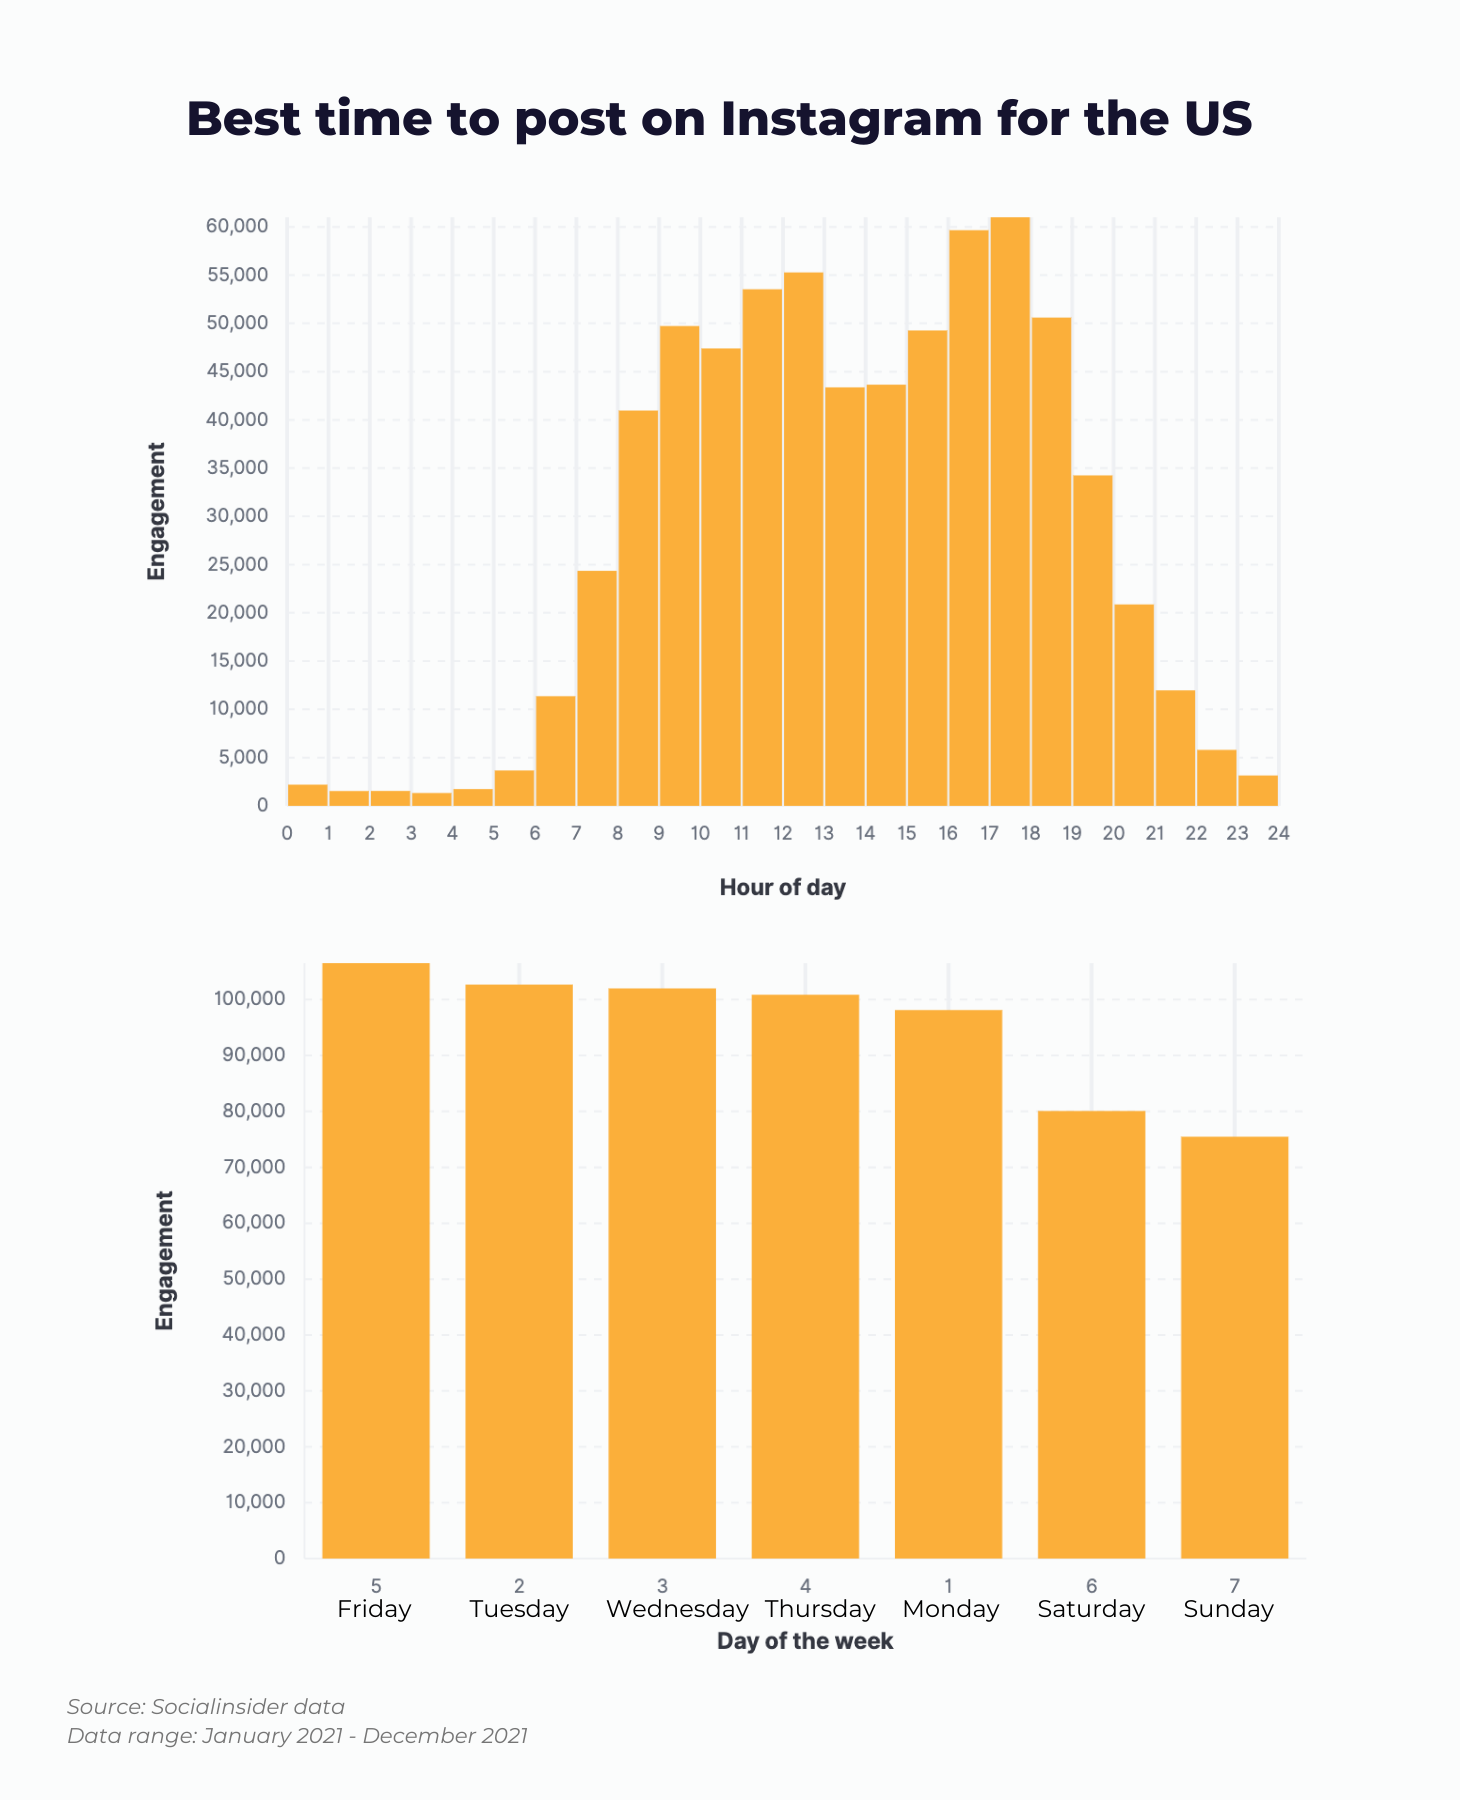 Here is a chart showing what data tells about the best time to post on instagramg for the US.